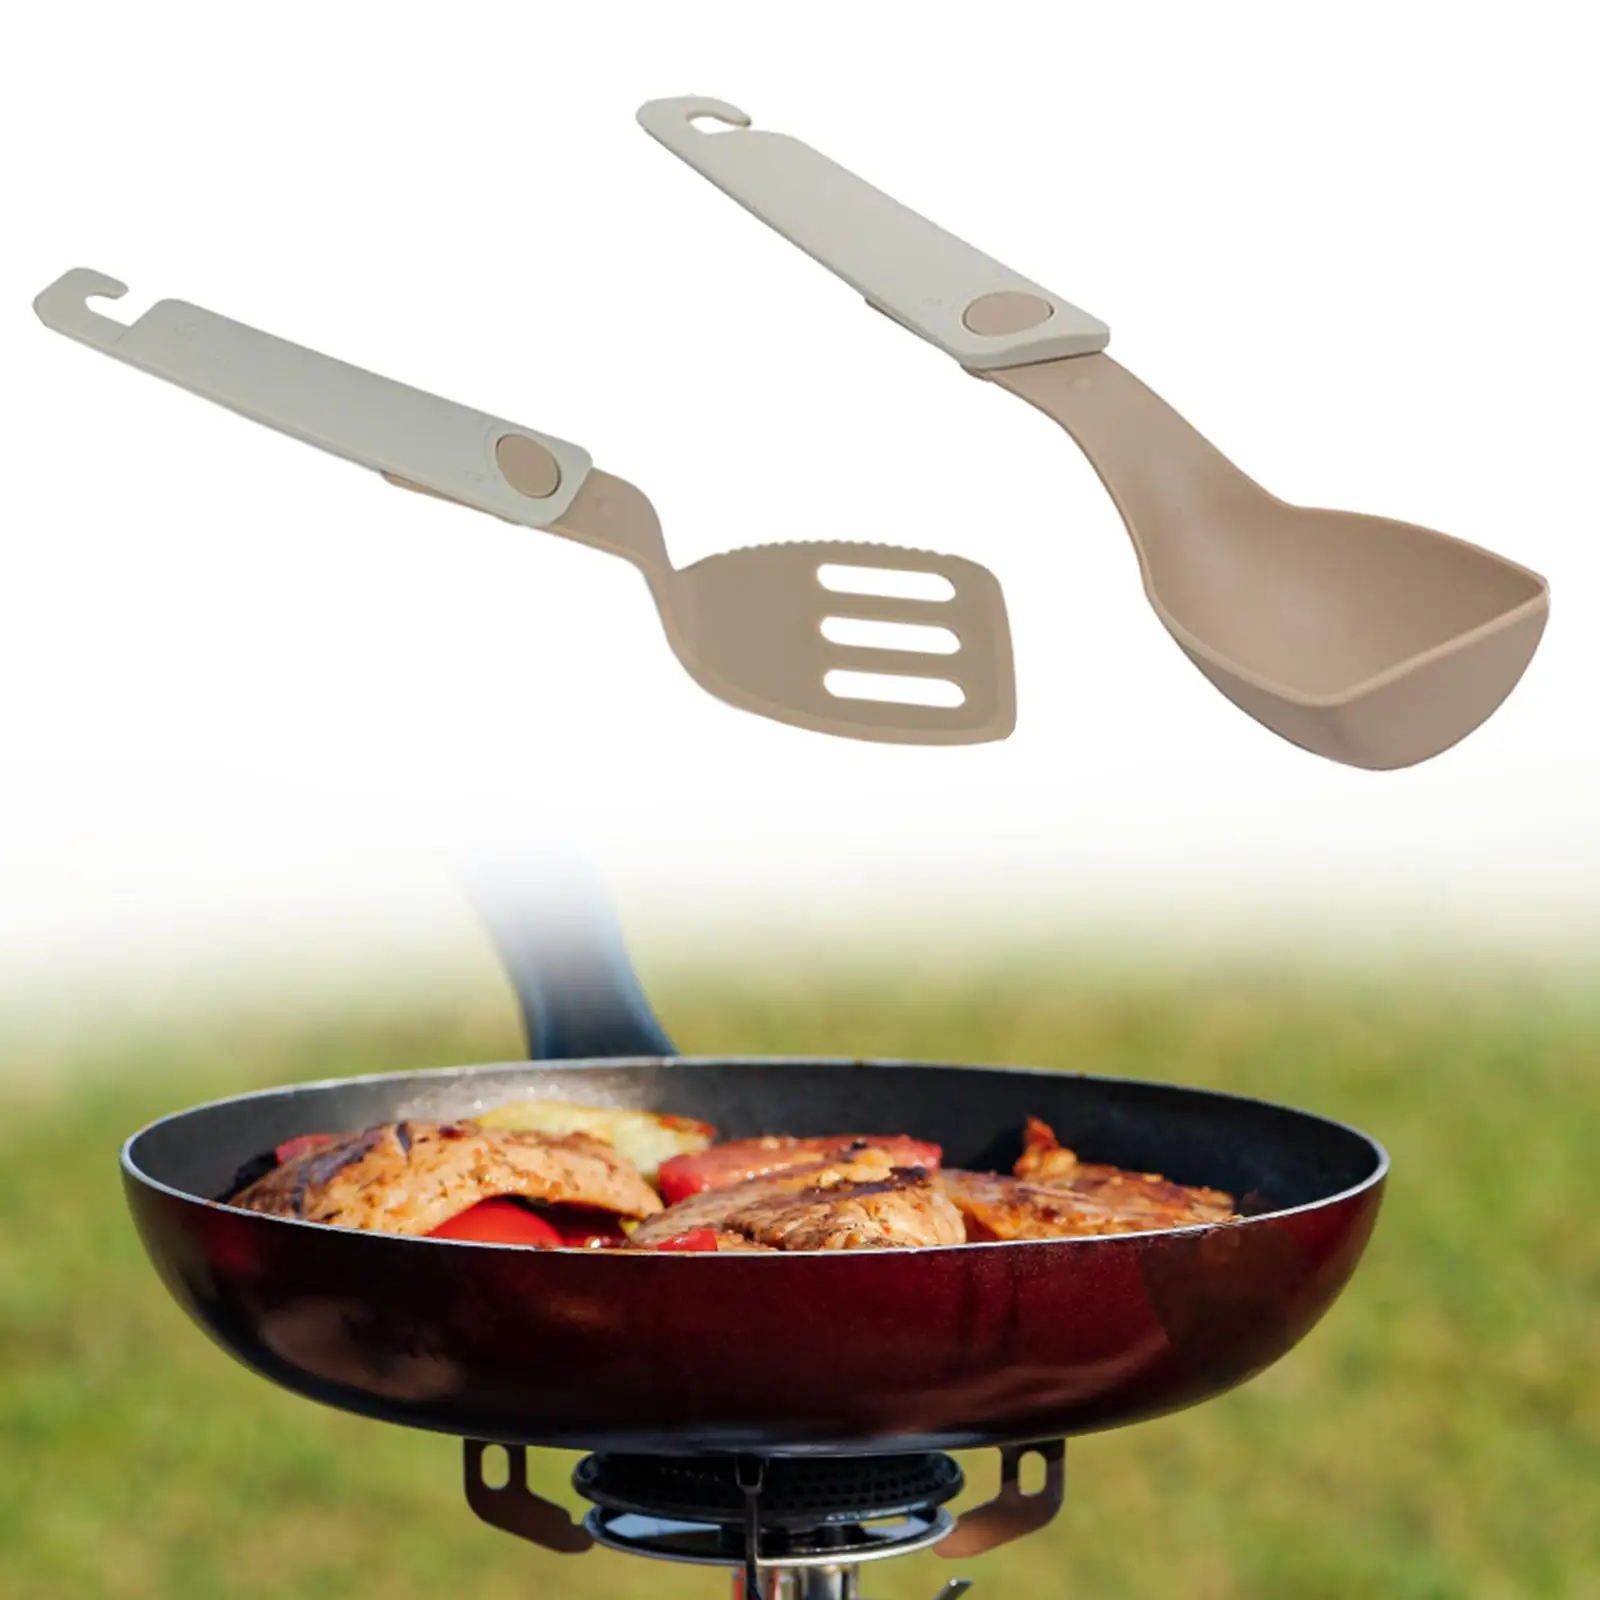 Outdoor Tableware Foldable Cooking Utensil Reusable Portable Camping Cutlery Flatware for BBQ Backpacking Kitchen Hiking